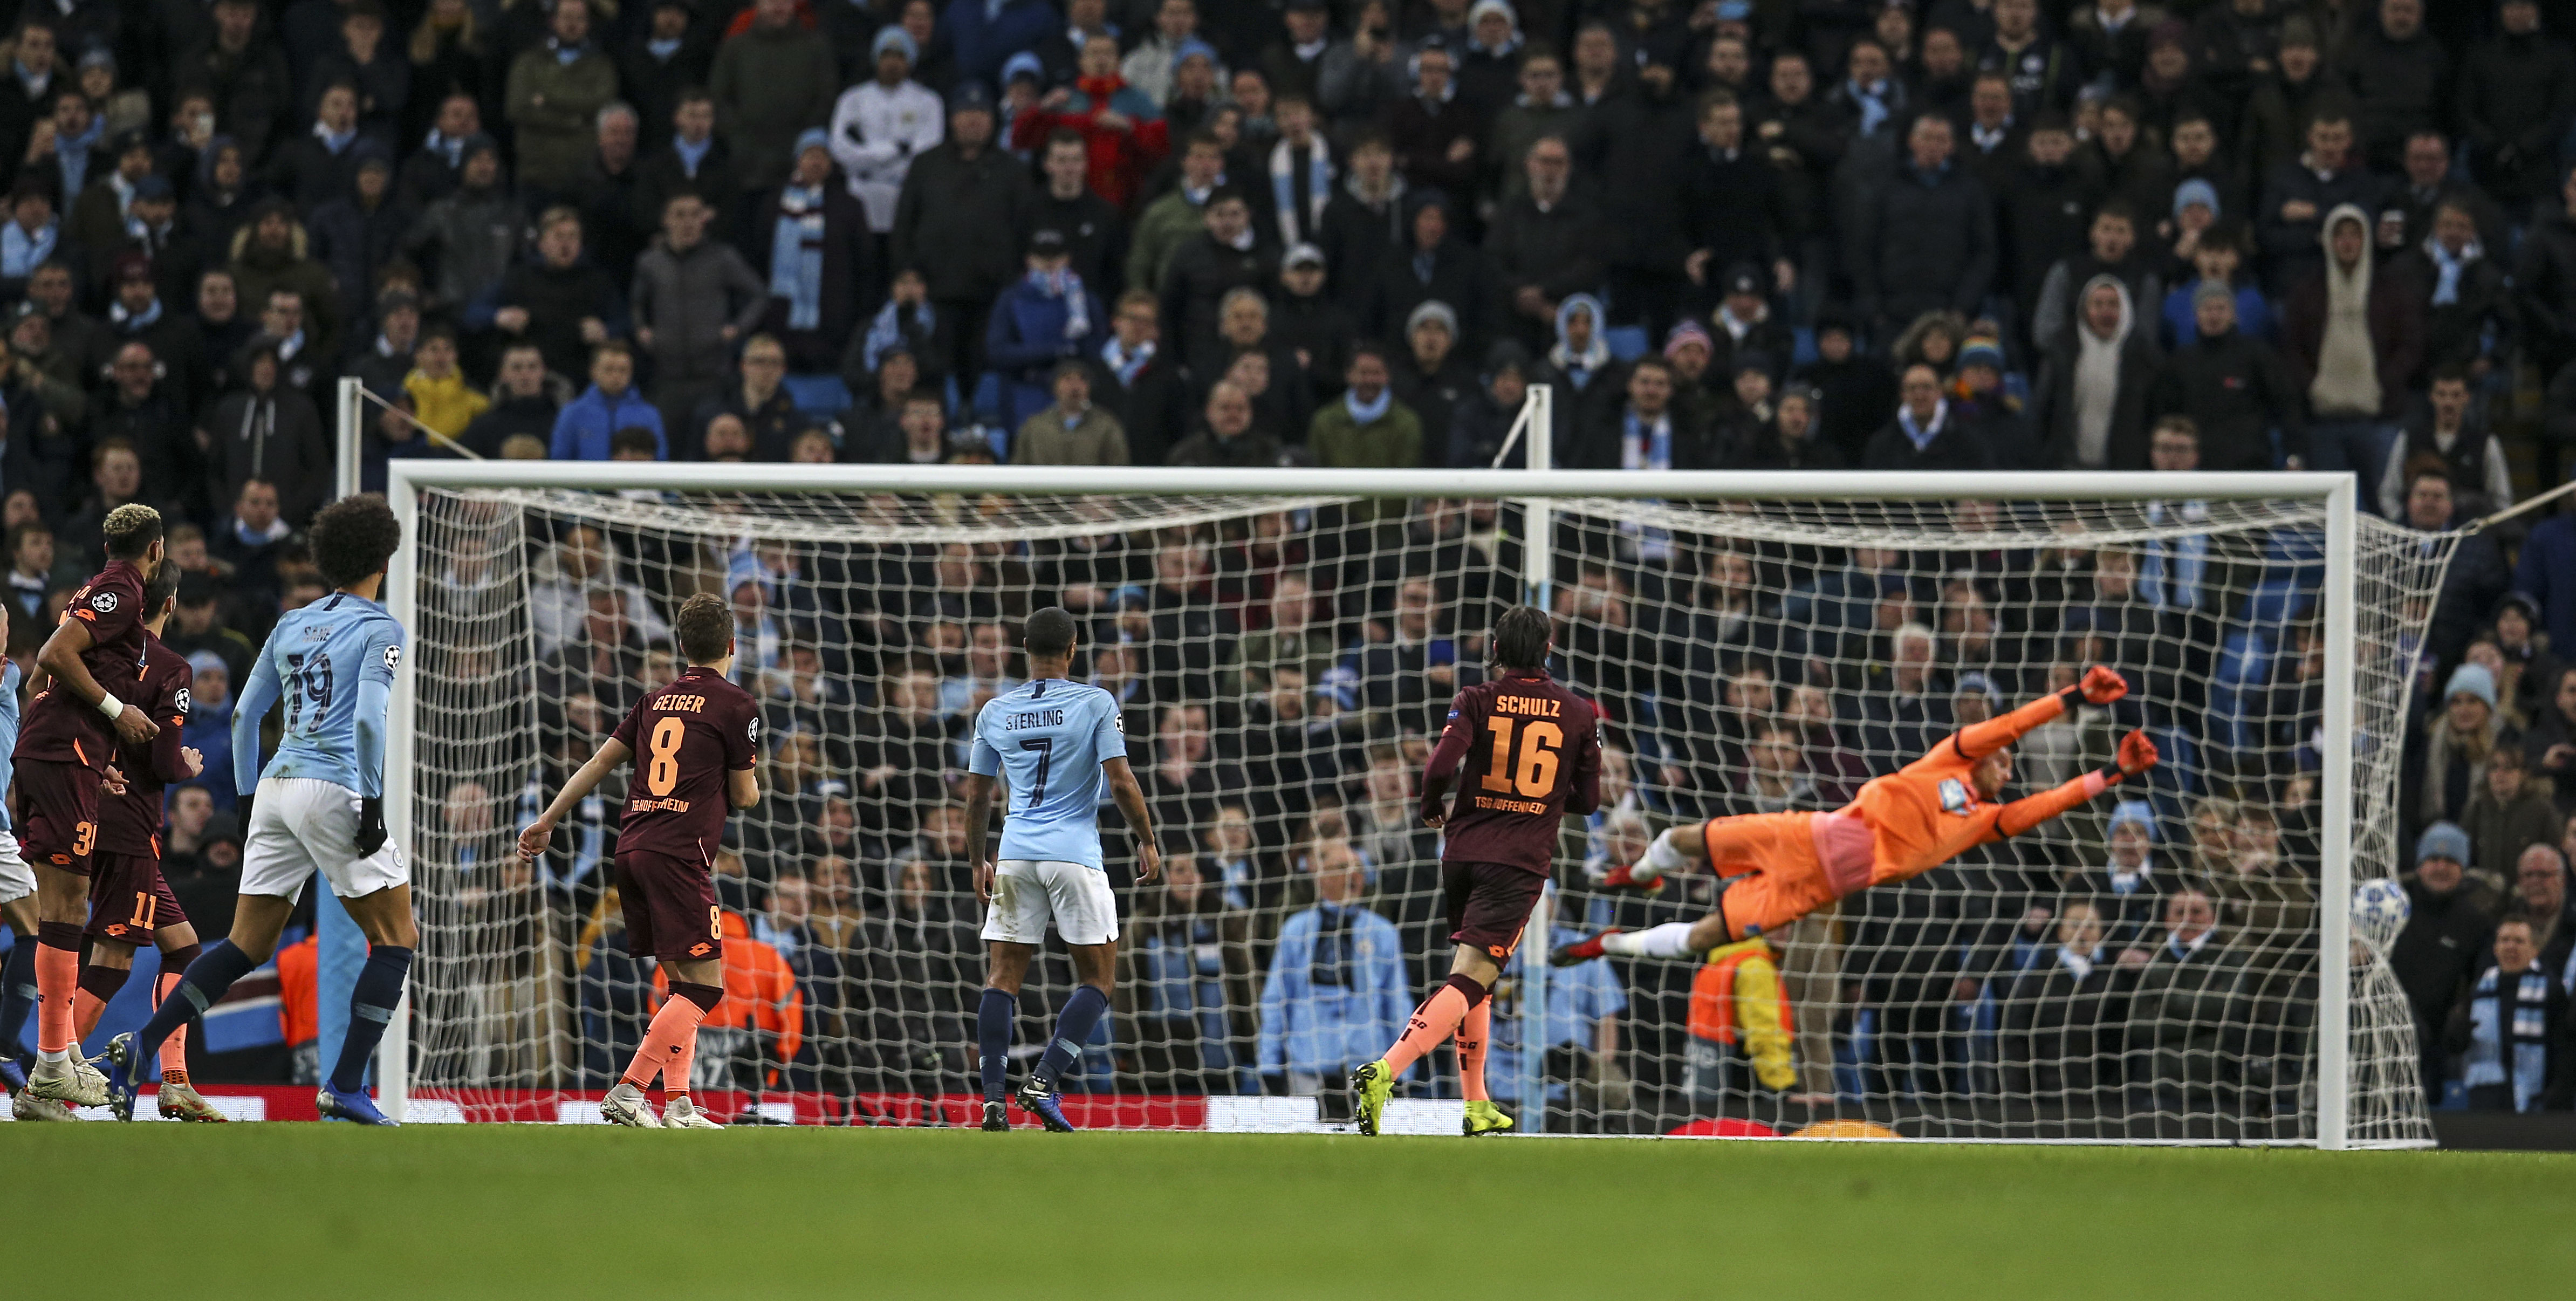 Sane double earns Man City 2-1 win, top spot in CL group